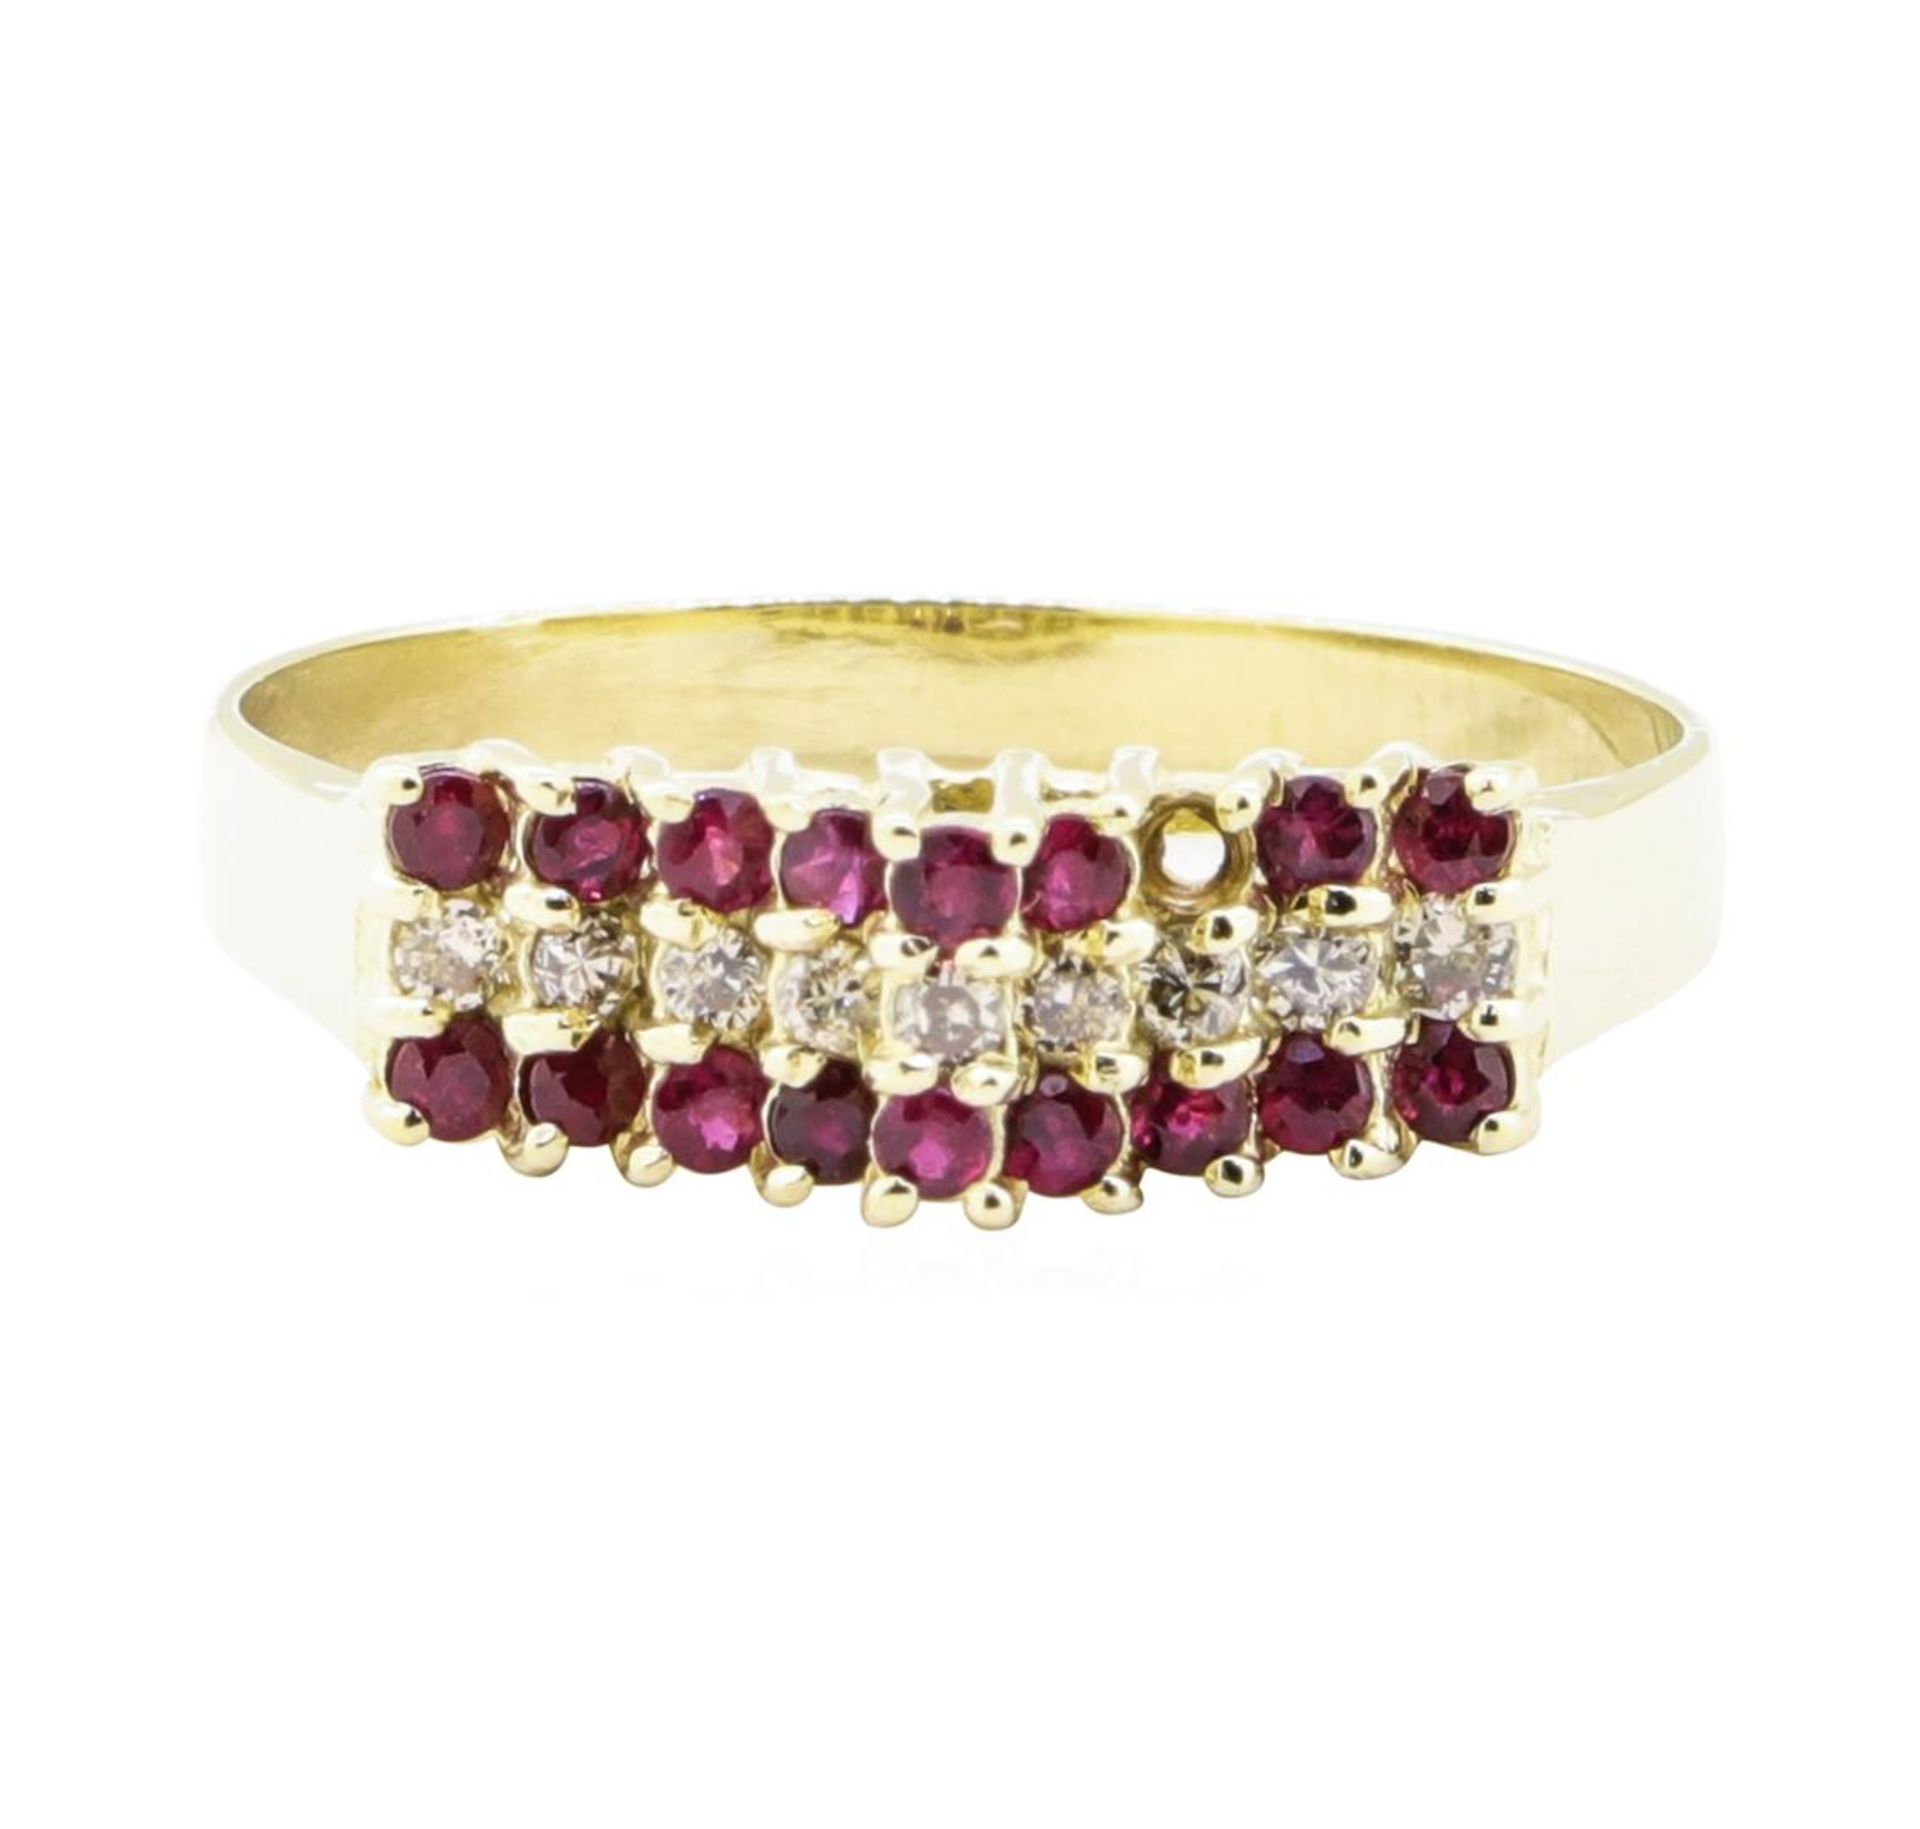 0.70 ctw Ruby and Diamond Ring - 14KT Yellow Gold - Image 2 of 4